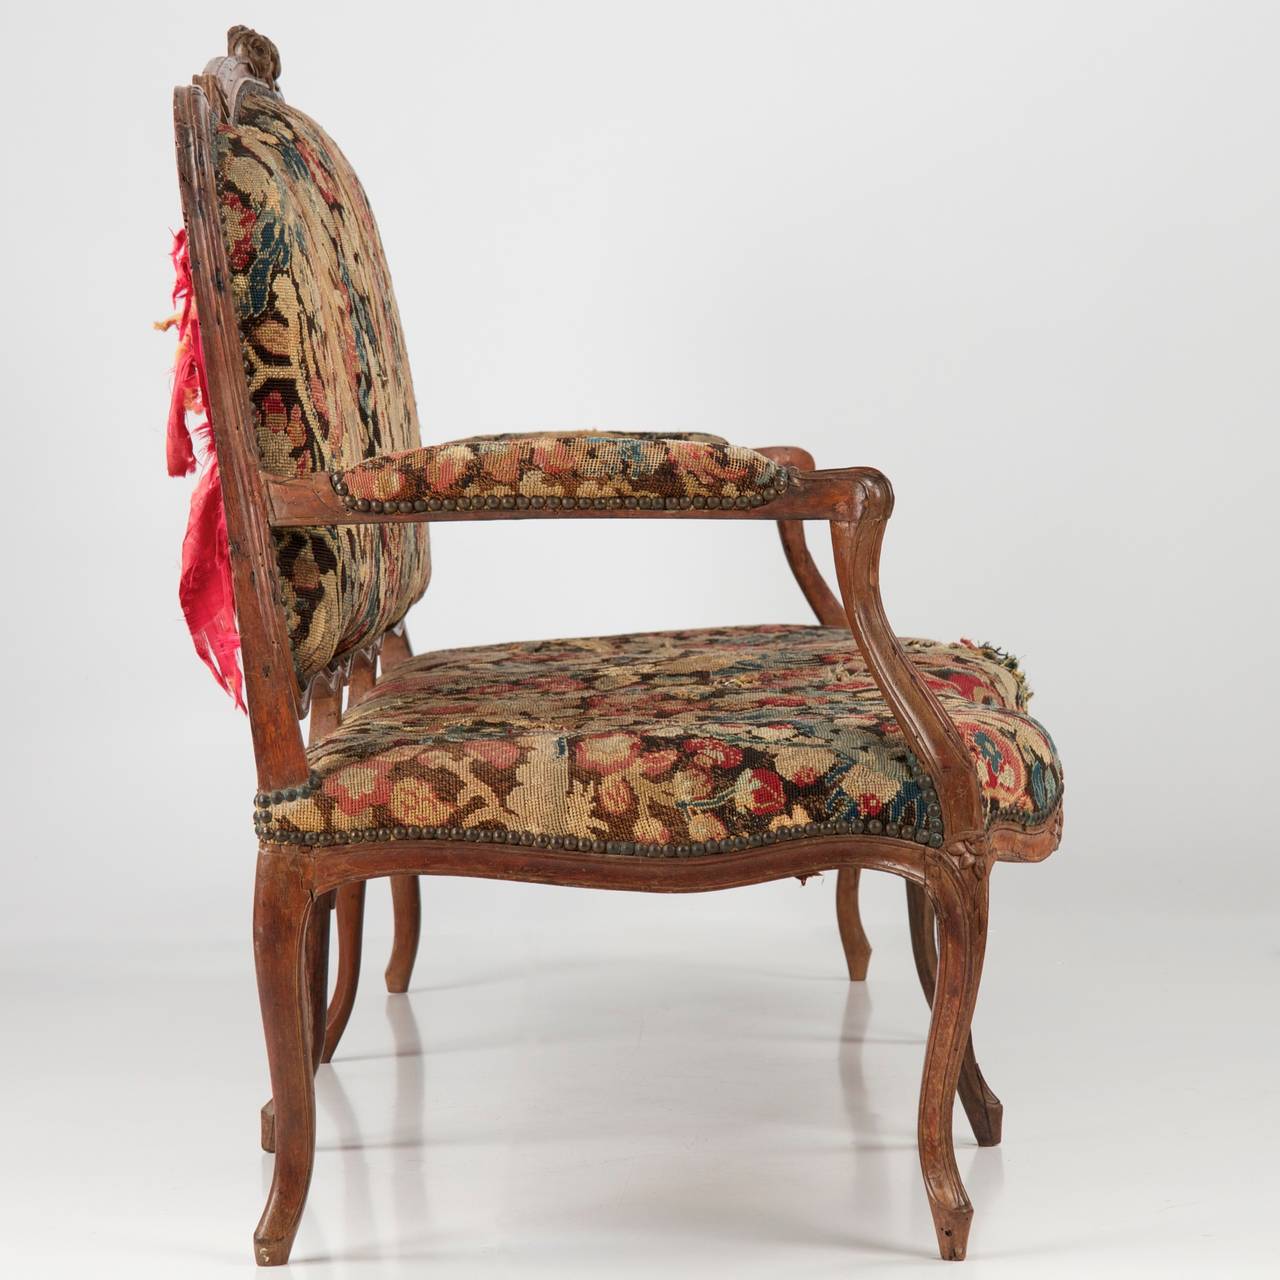 Carved French Louis XV Antique Walnut Canape or Settee, 18th Century